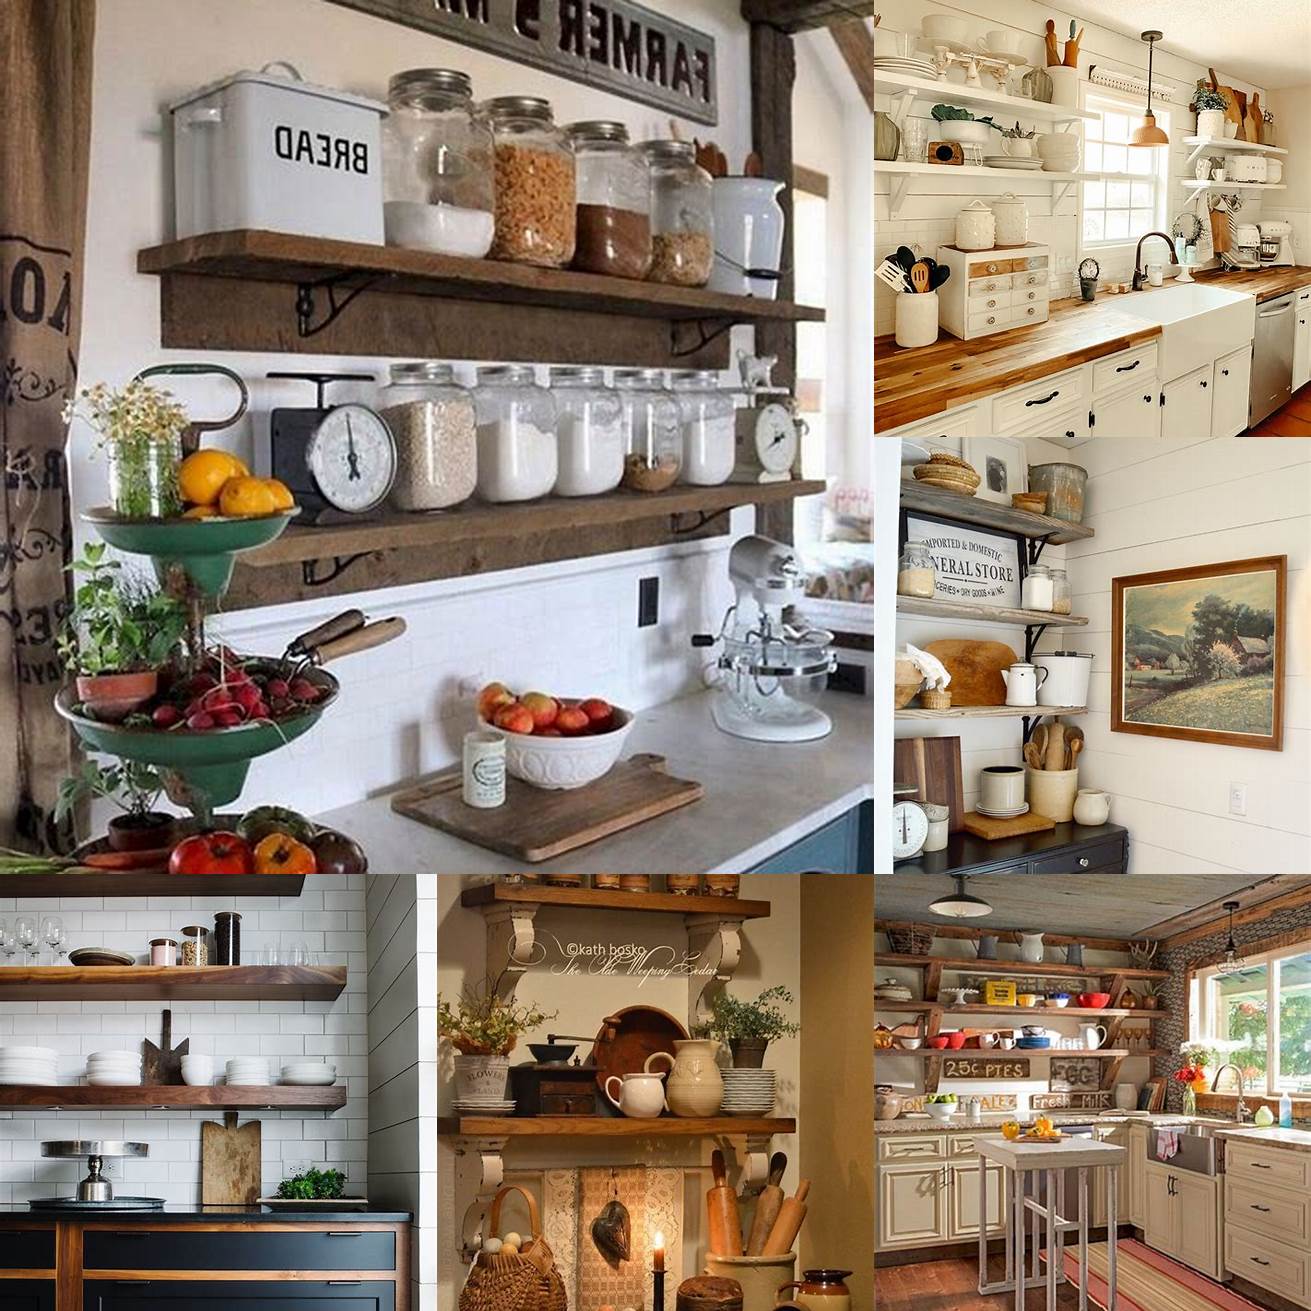 Rustic kitchen with open shelving and vintage accents